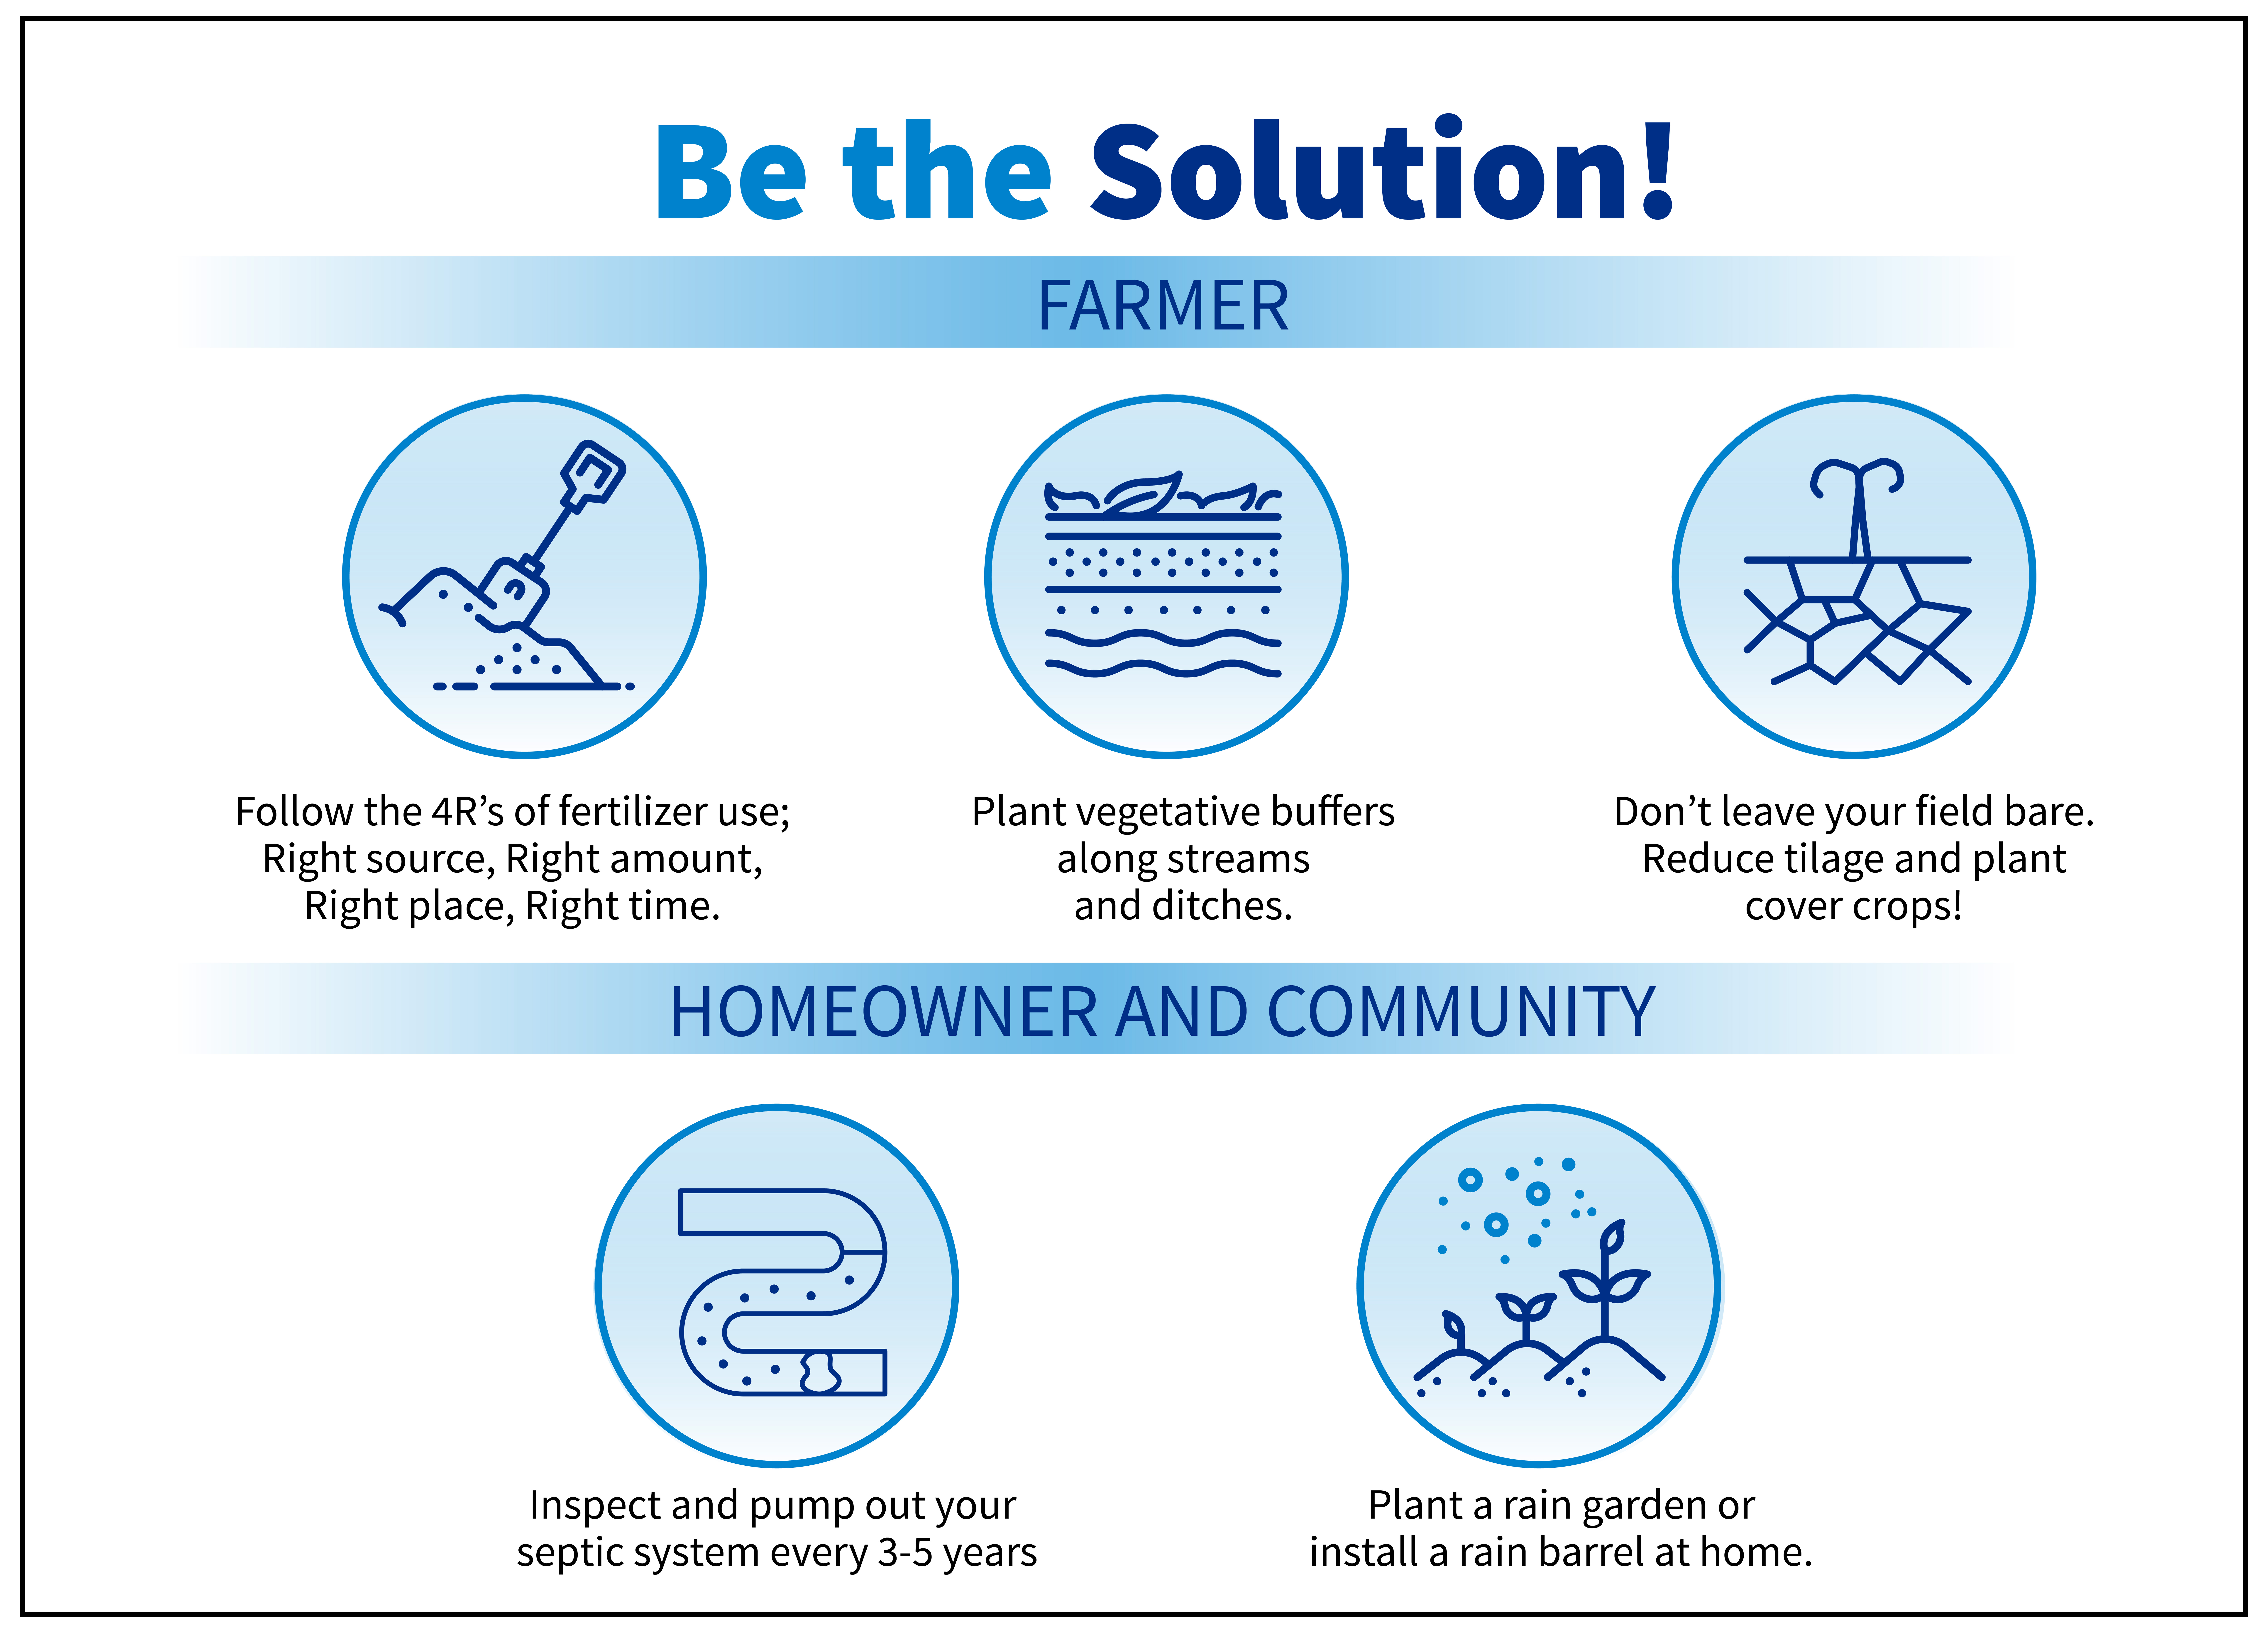 Strategies to improve water quality.  For farmers these include fertilizer, buffer, and crops. For community they are septic tanks and rain gardens.